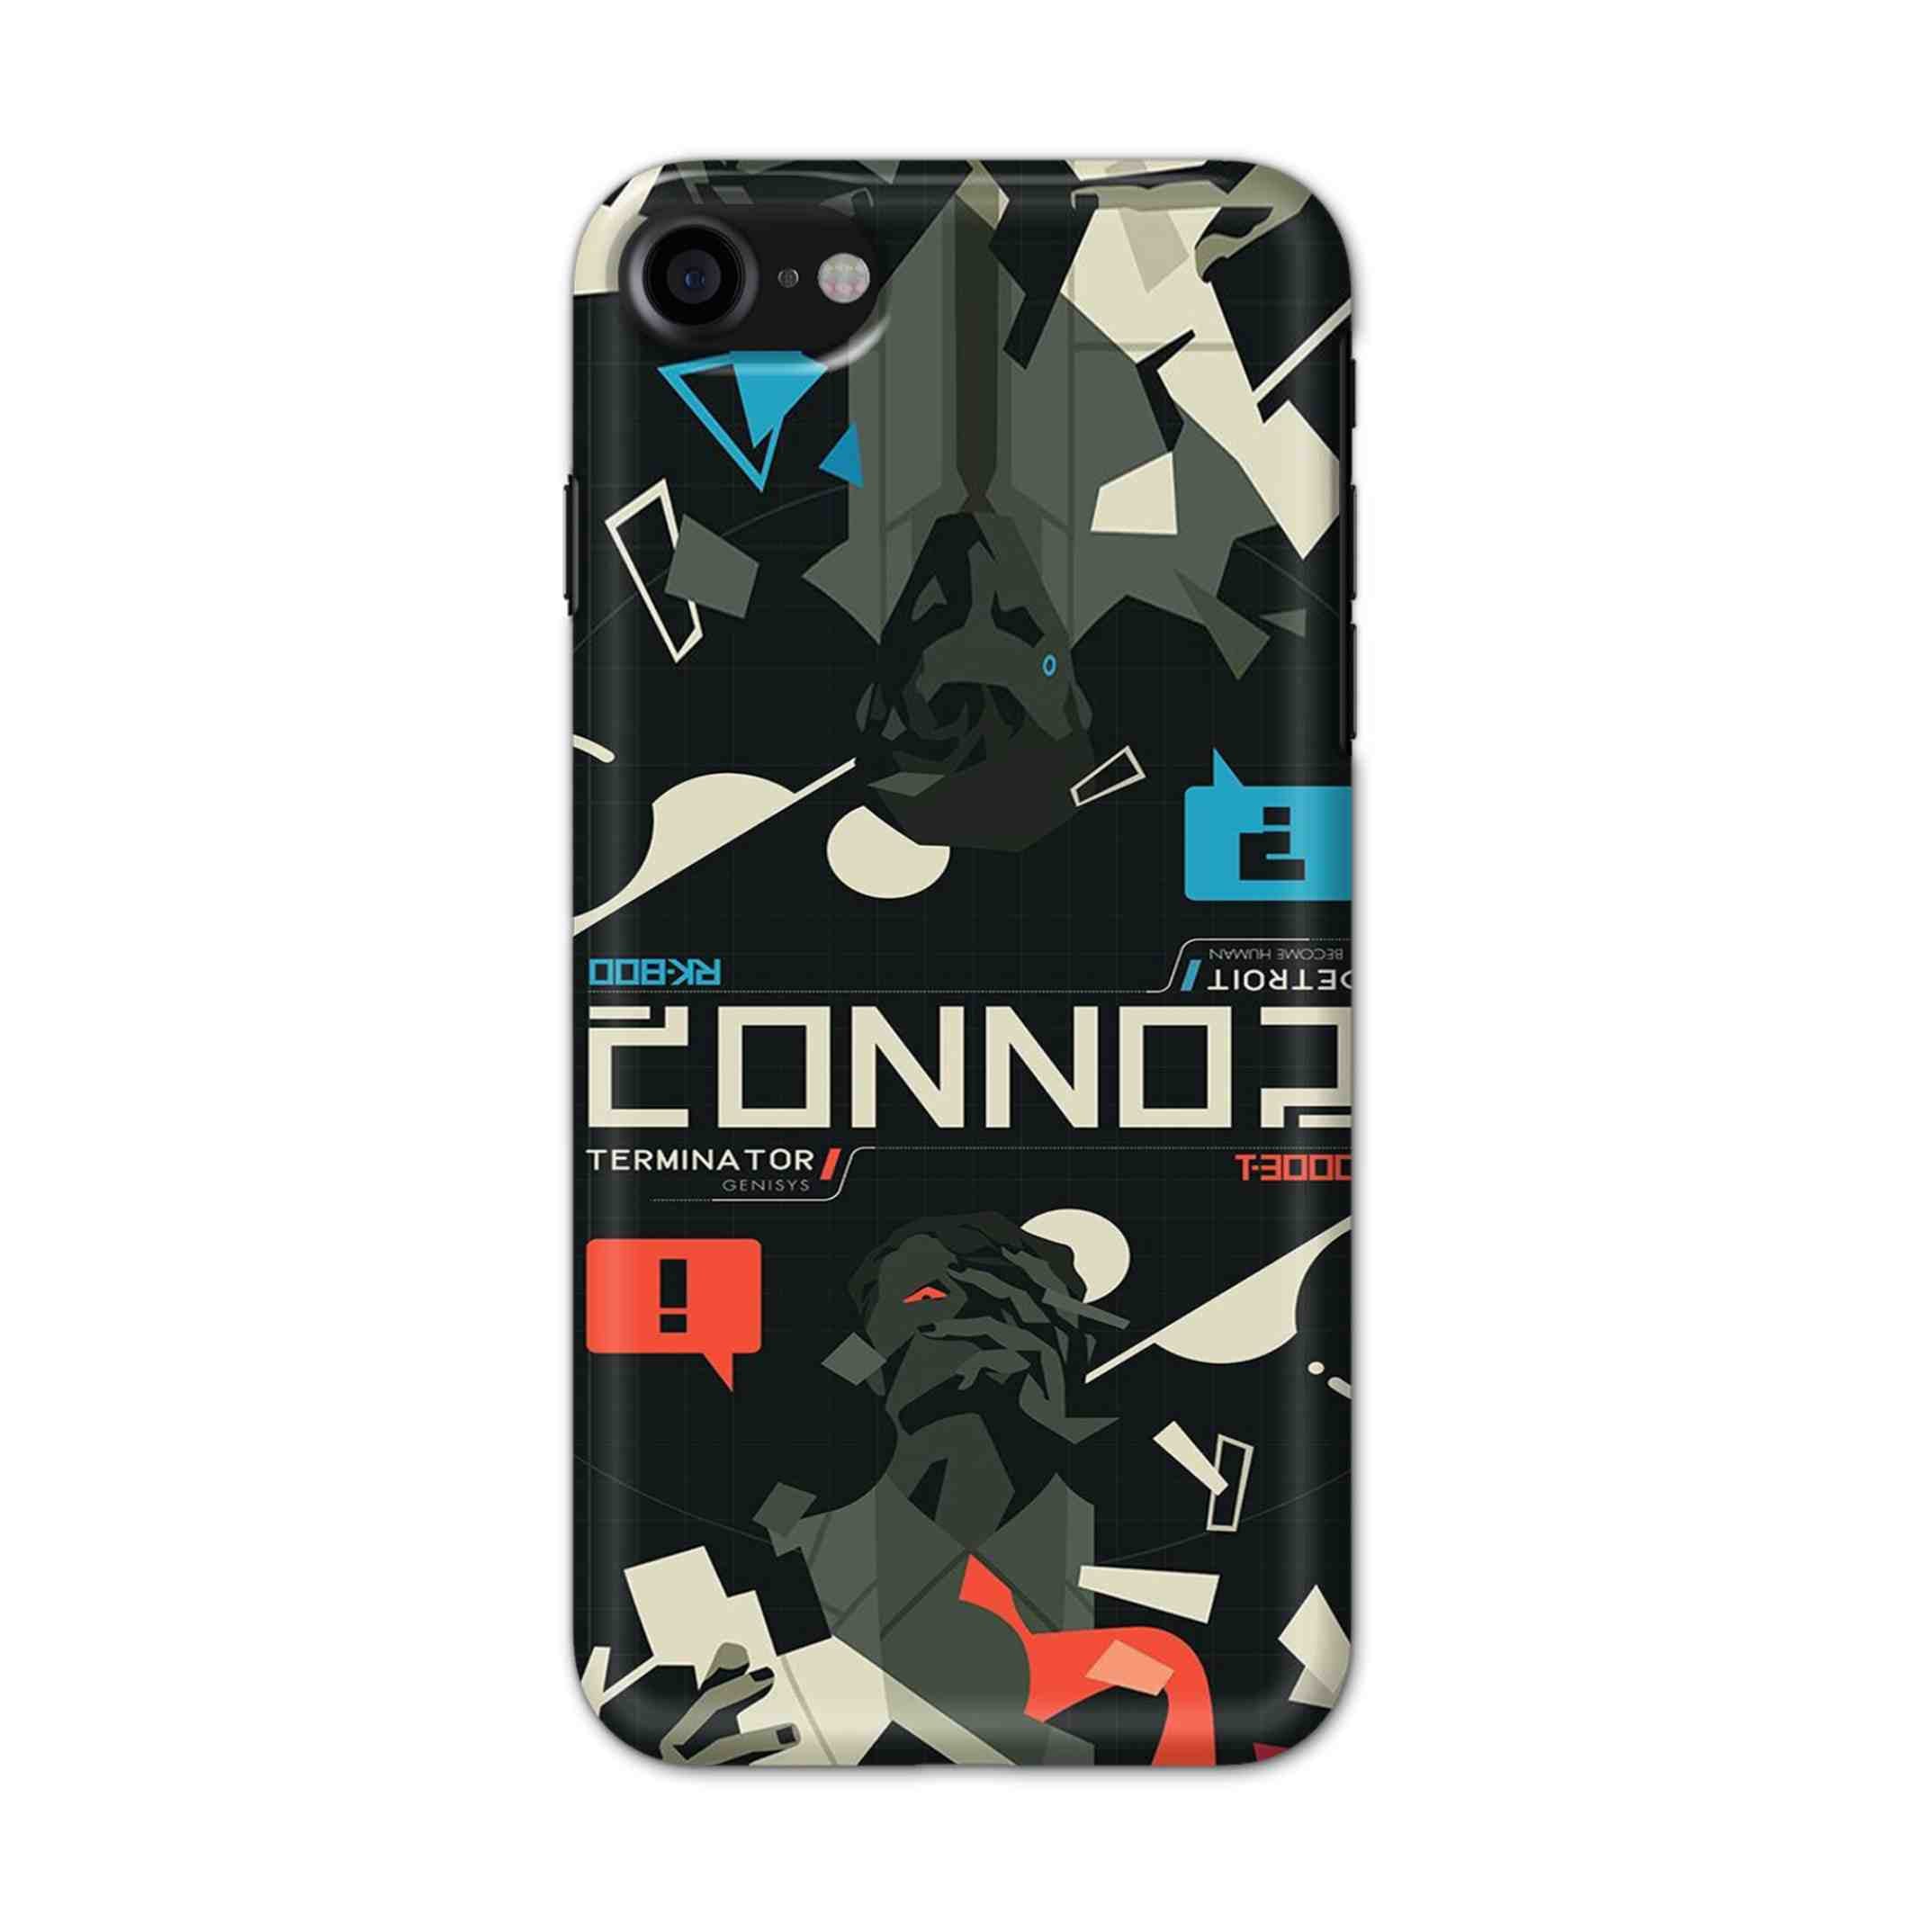 Buy Terminator Hard Back Mobile Phone Case/Cover For iPhone 7 / 8 Online